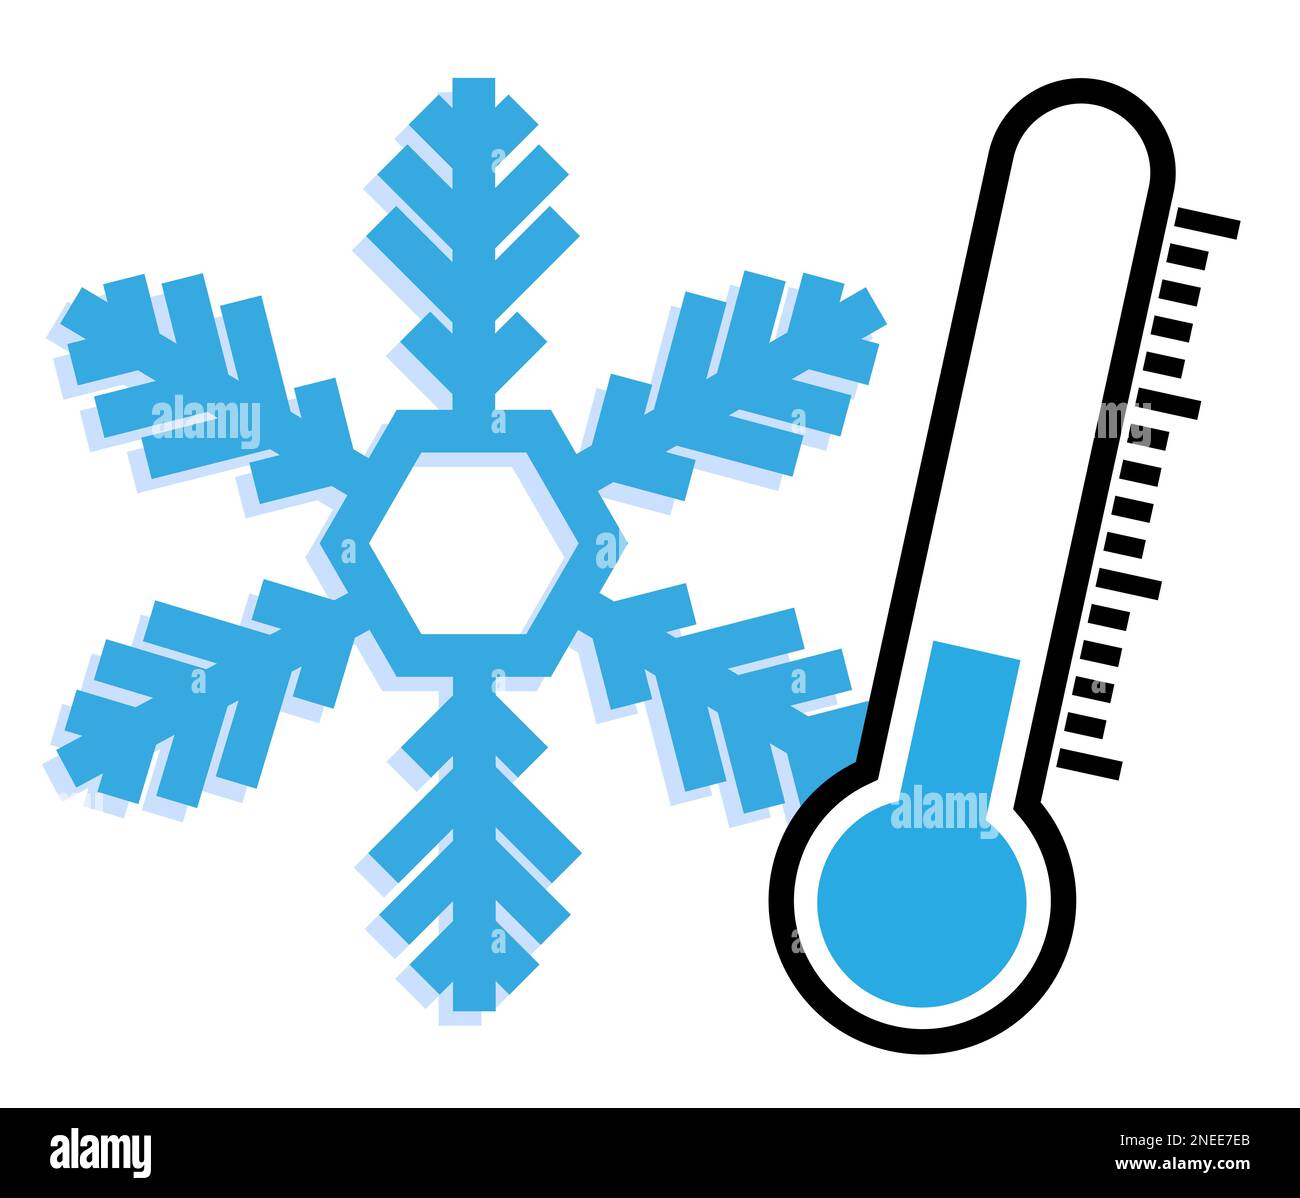 https://c8.alamy.com/comp/2NEE7EB/winter-freezing-temperatures-icon-or-symbol-thermometer-and-snowflake-vector-illustration-2NEE7EB.jpg